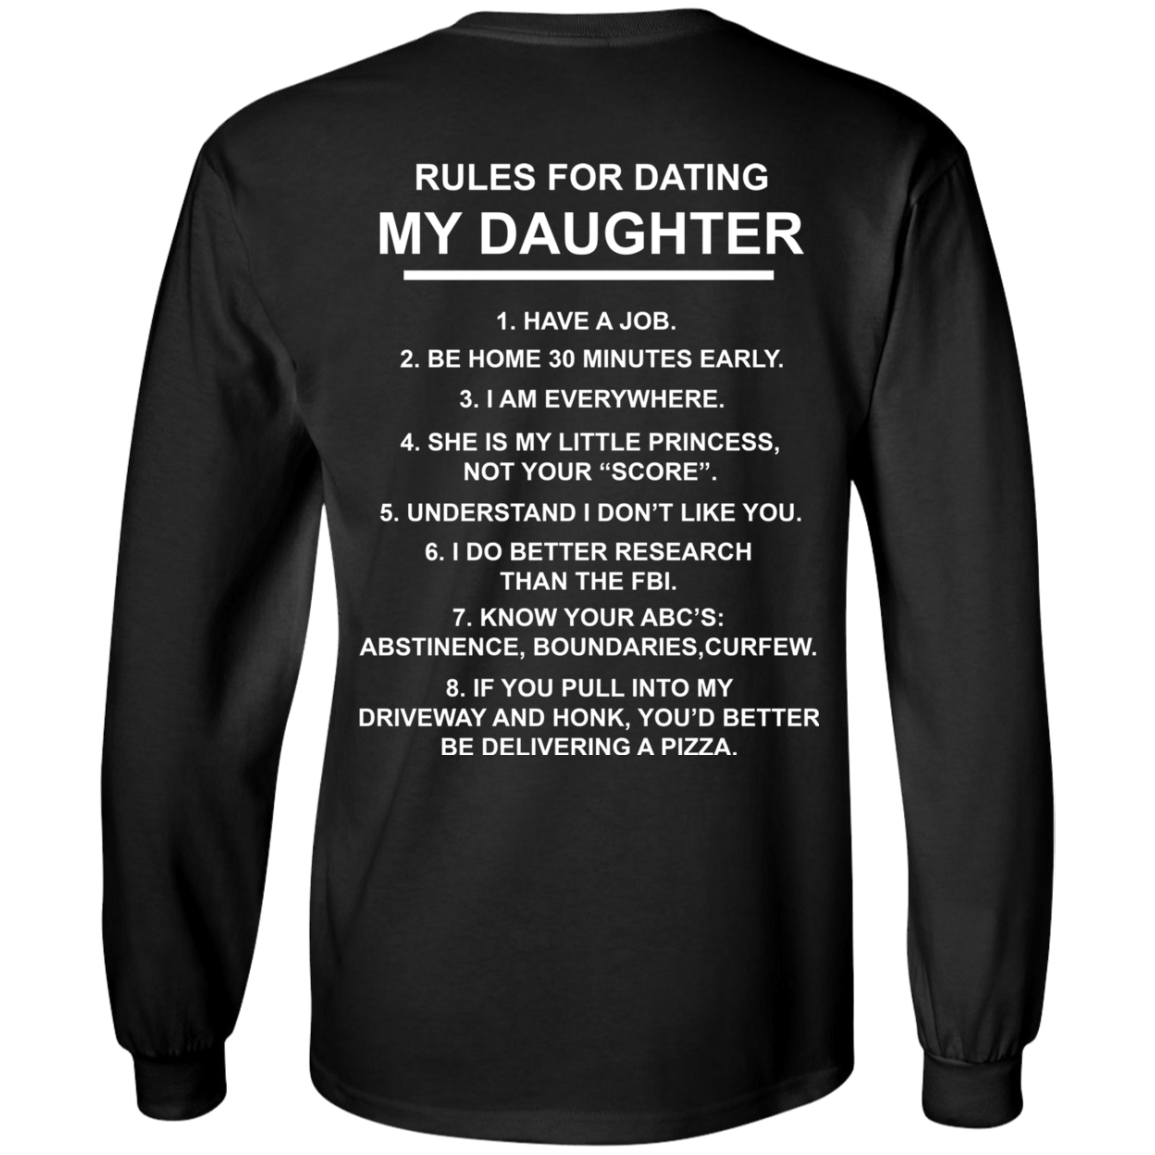 10 rules of dating my daughter t shirt